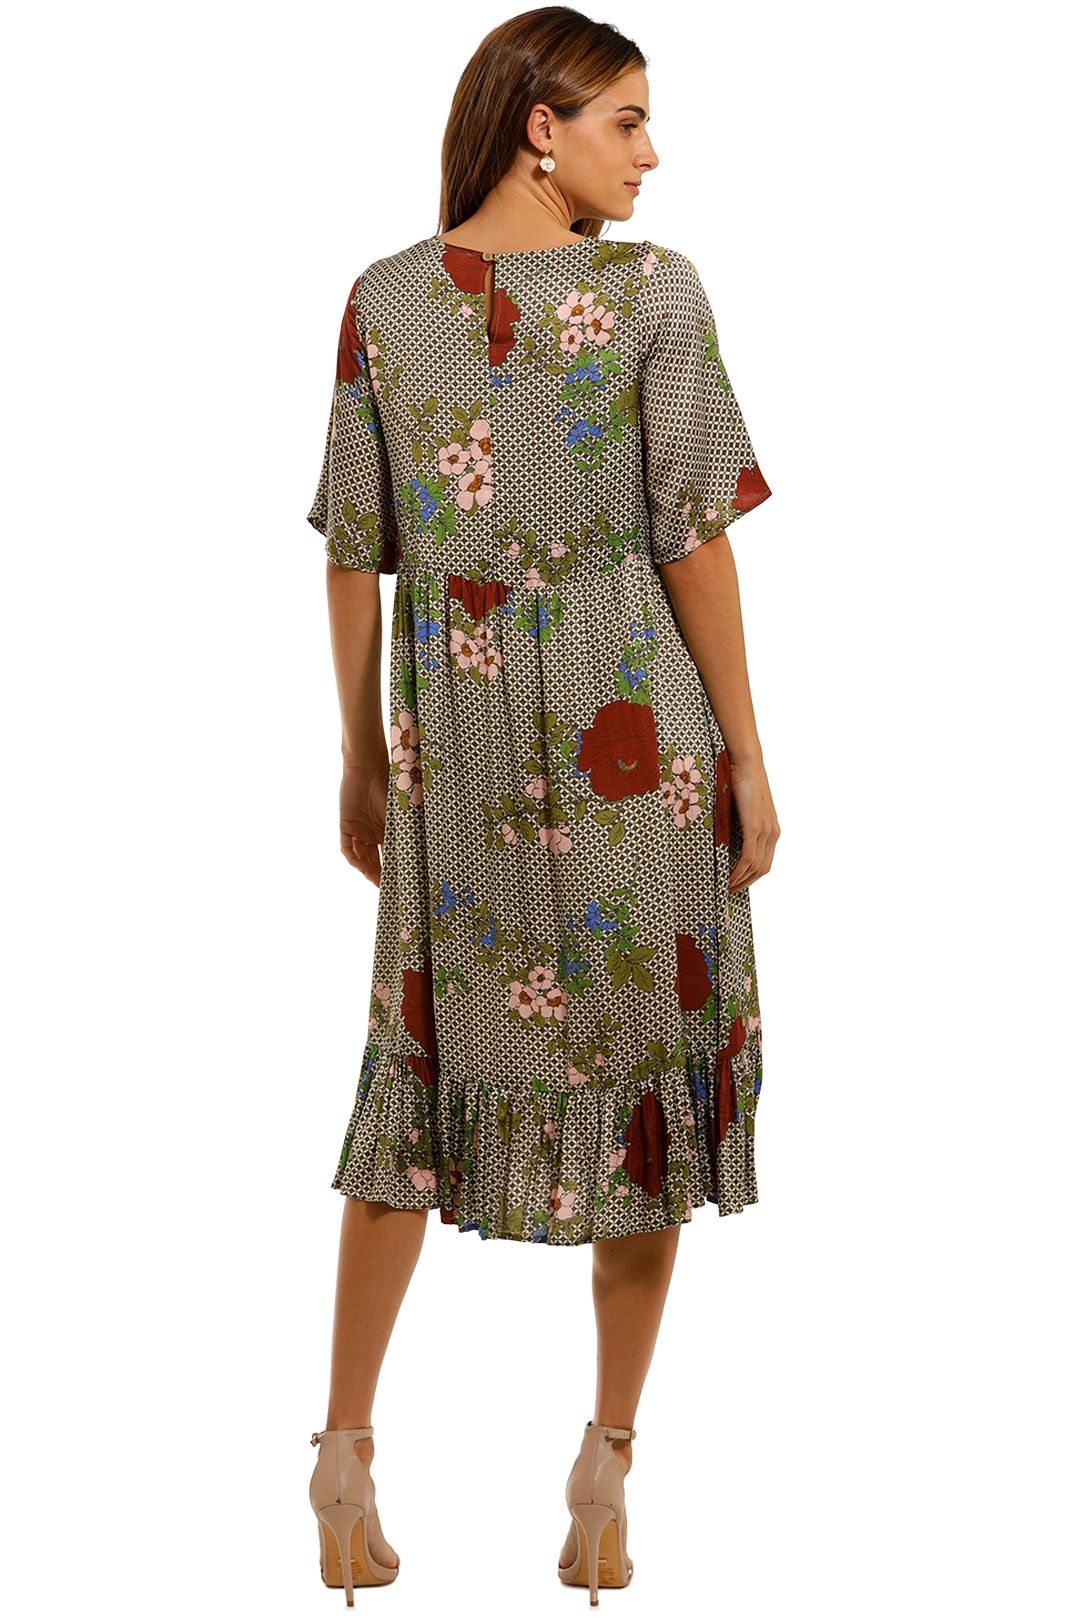 Curate by Trelise Cooper Sheer Love Dress floral